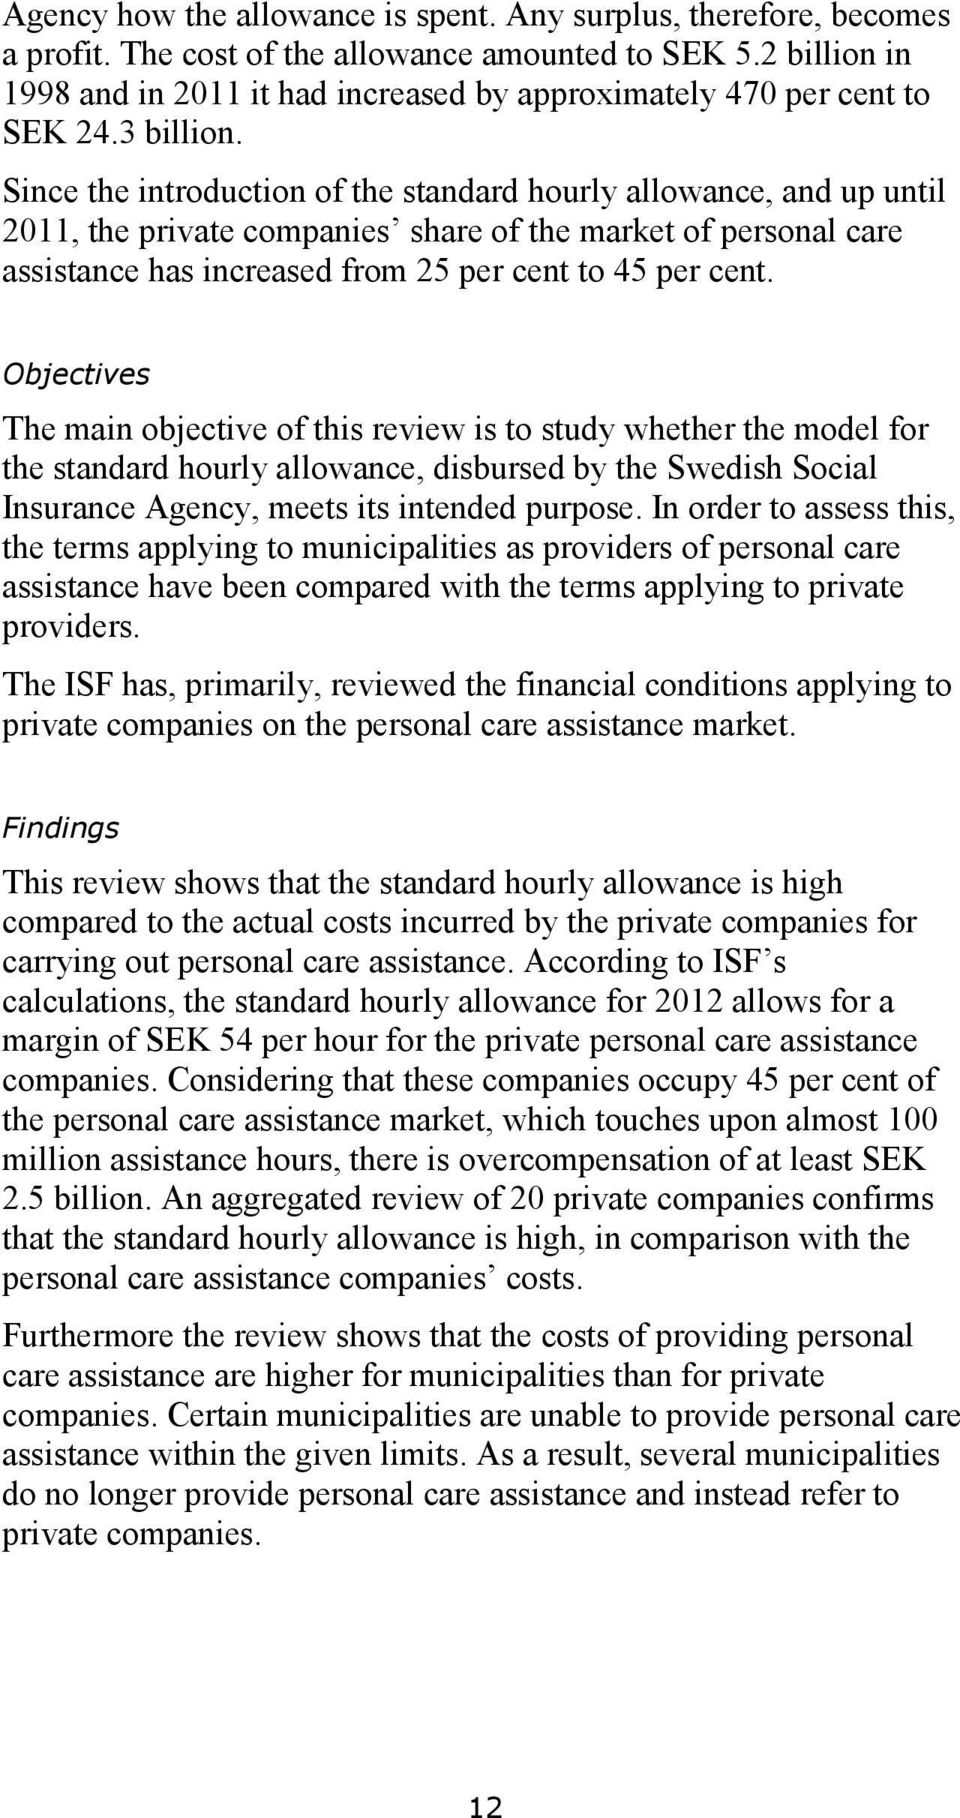 Since the introduction of the standard hourly allowance, and up until 2011, the private companies share of the market of personal care assistance has increased from 25 per cent to 45 per cent.